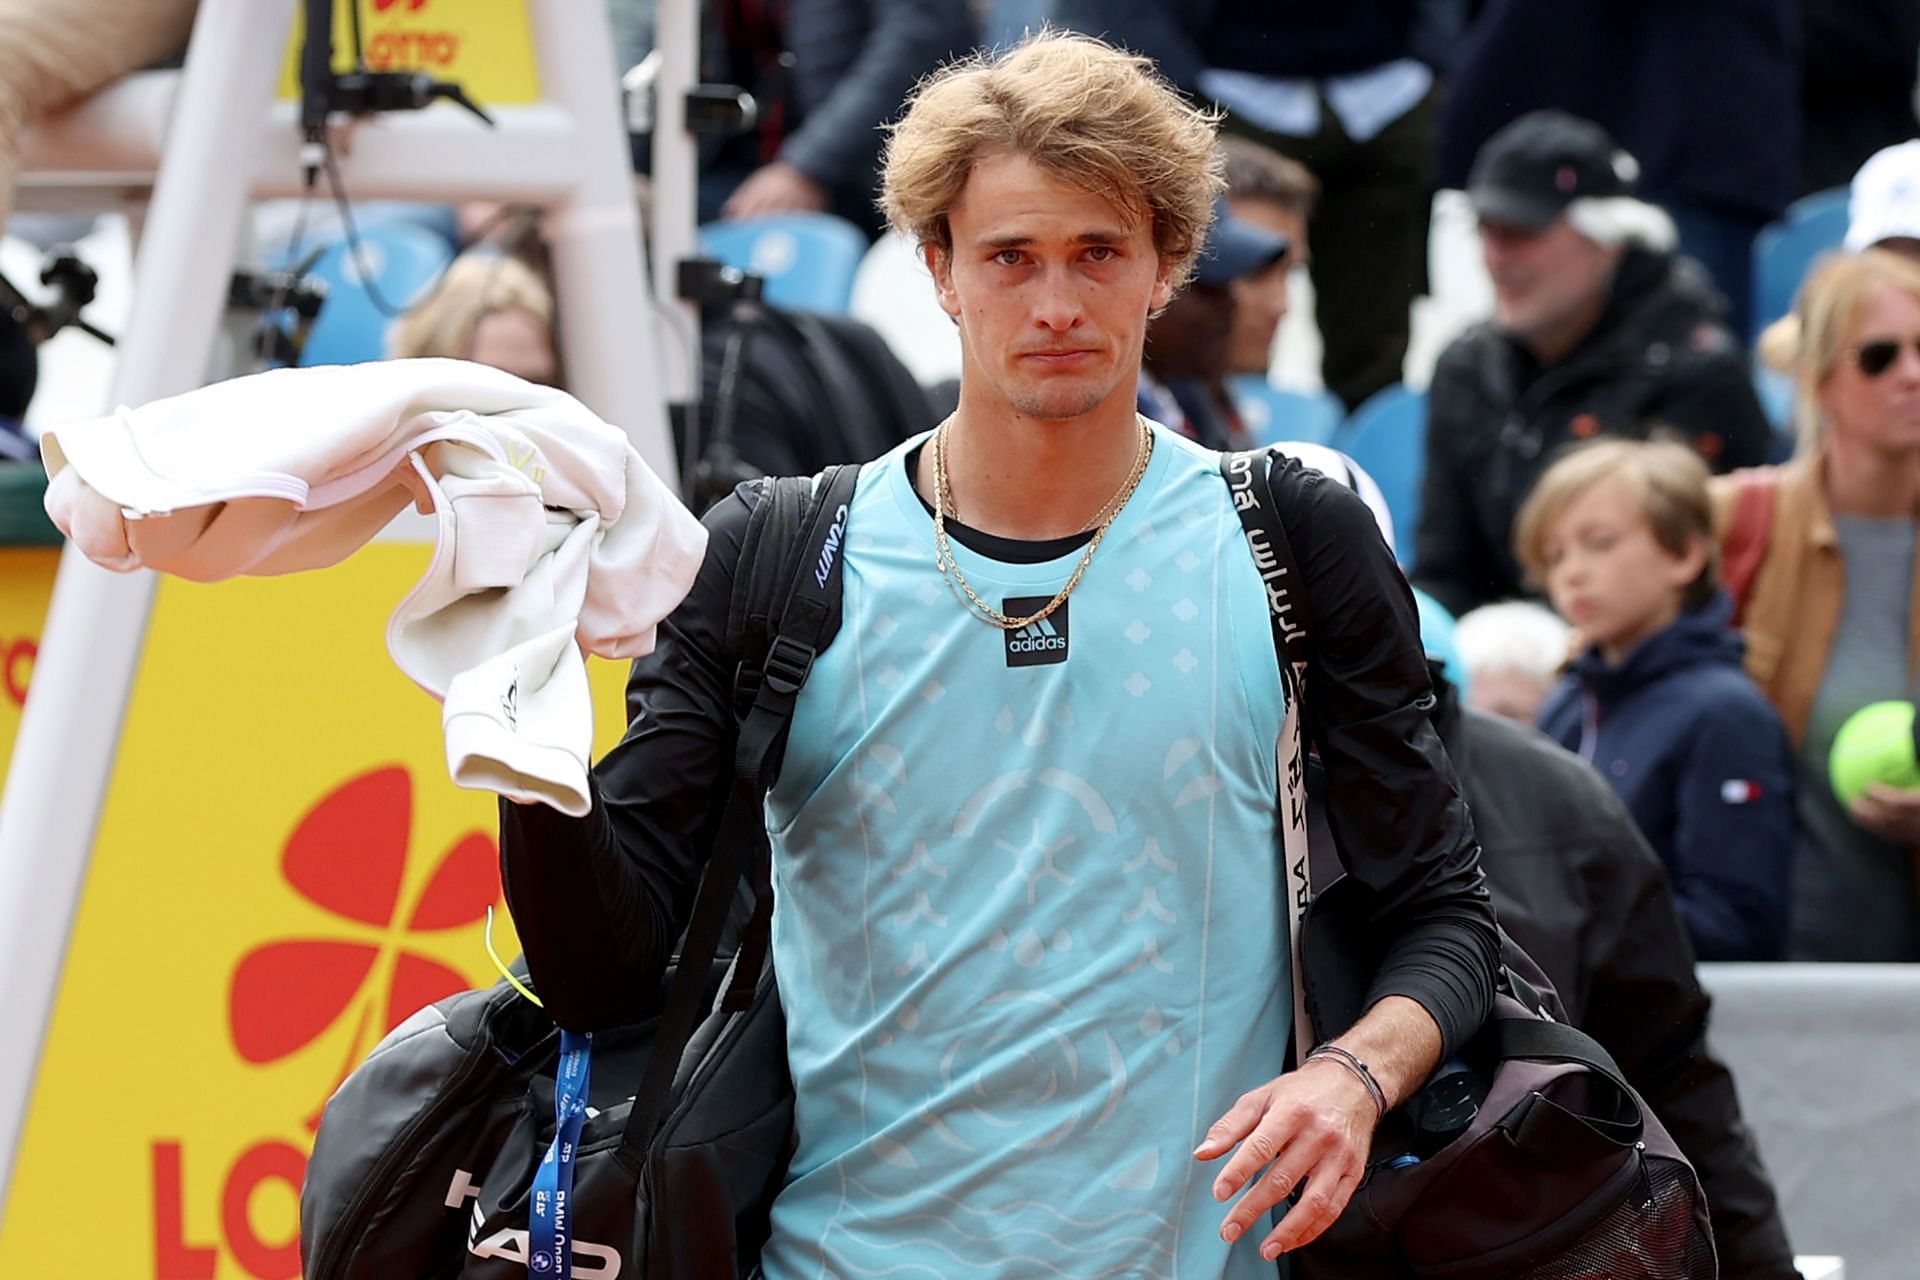 Alexander Zverev was eliminated in the second round of the BMW Open